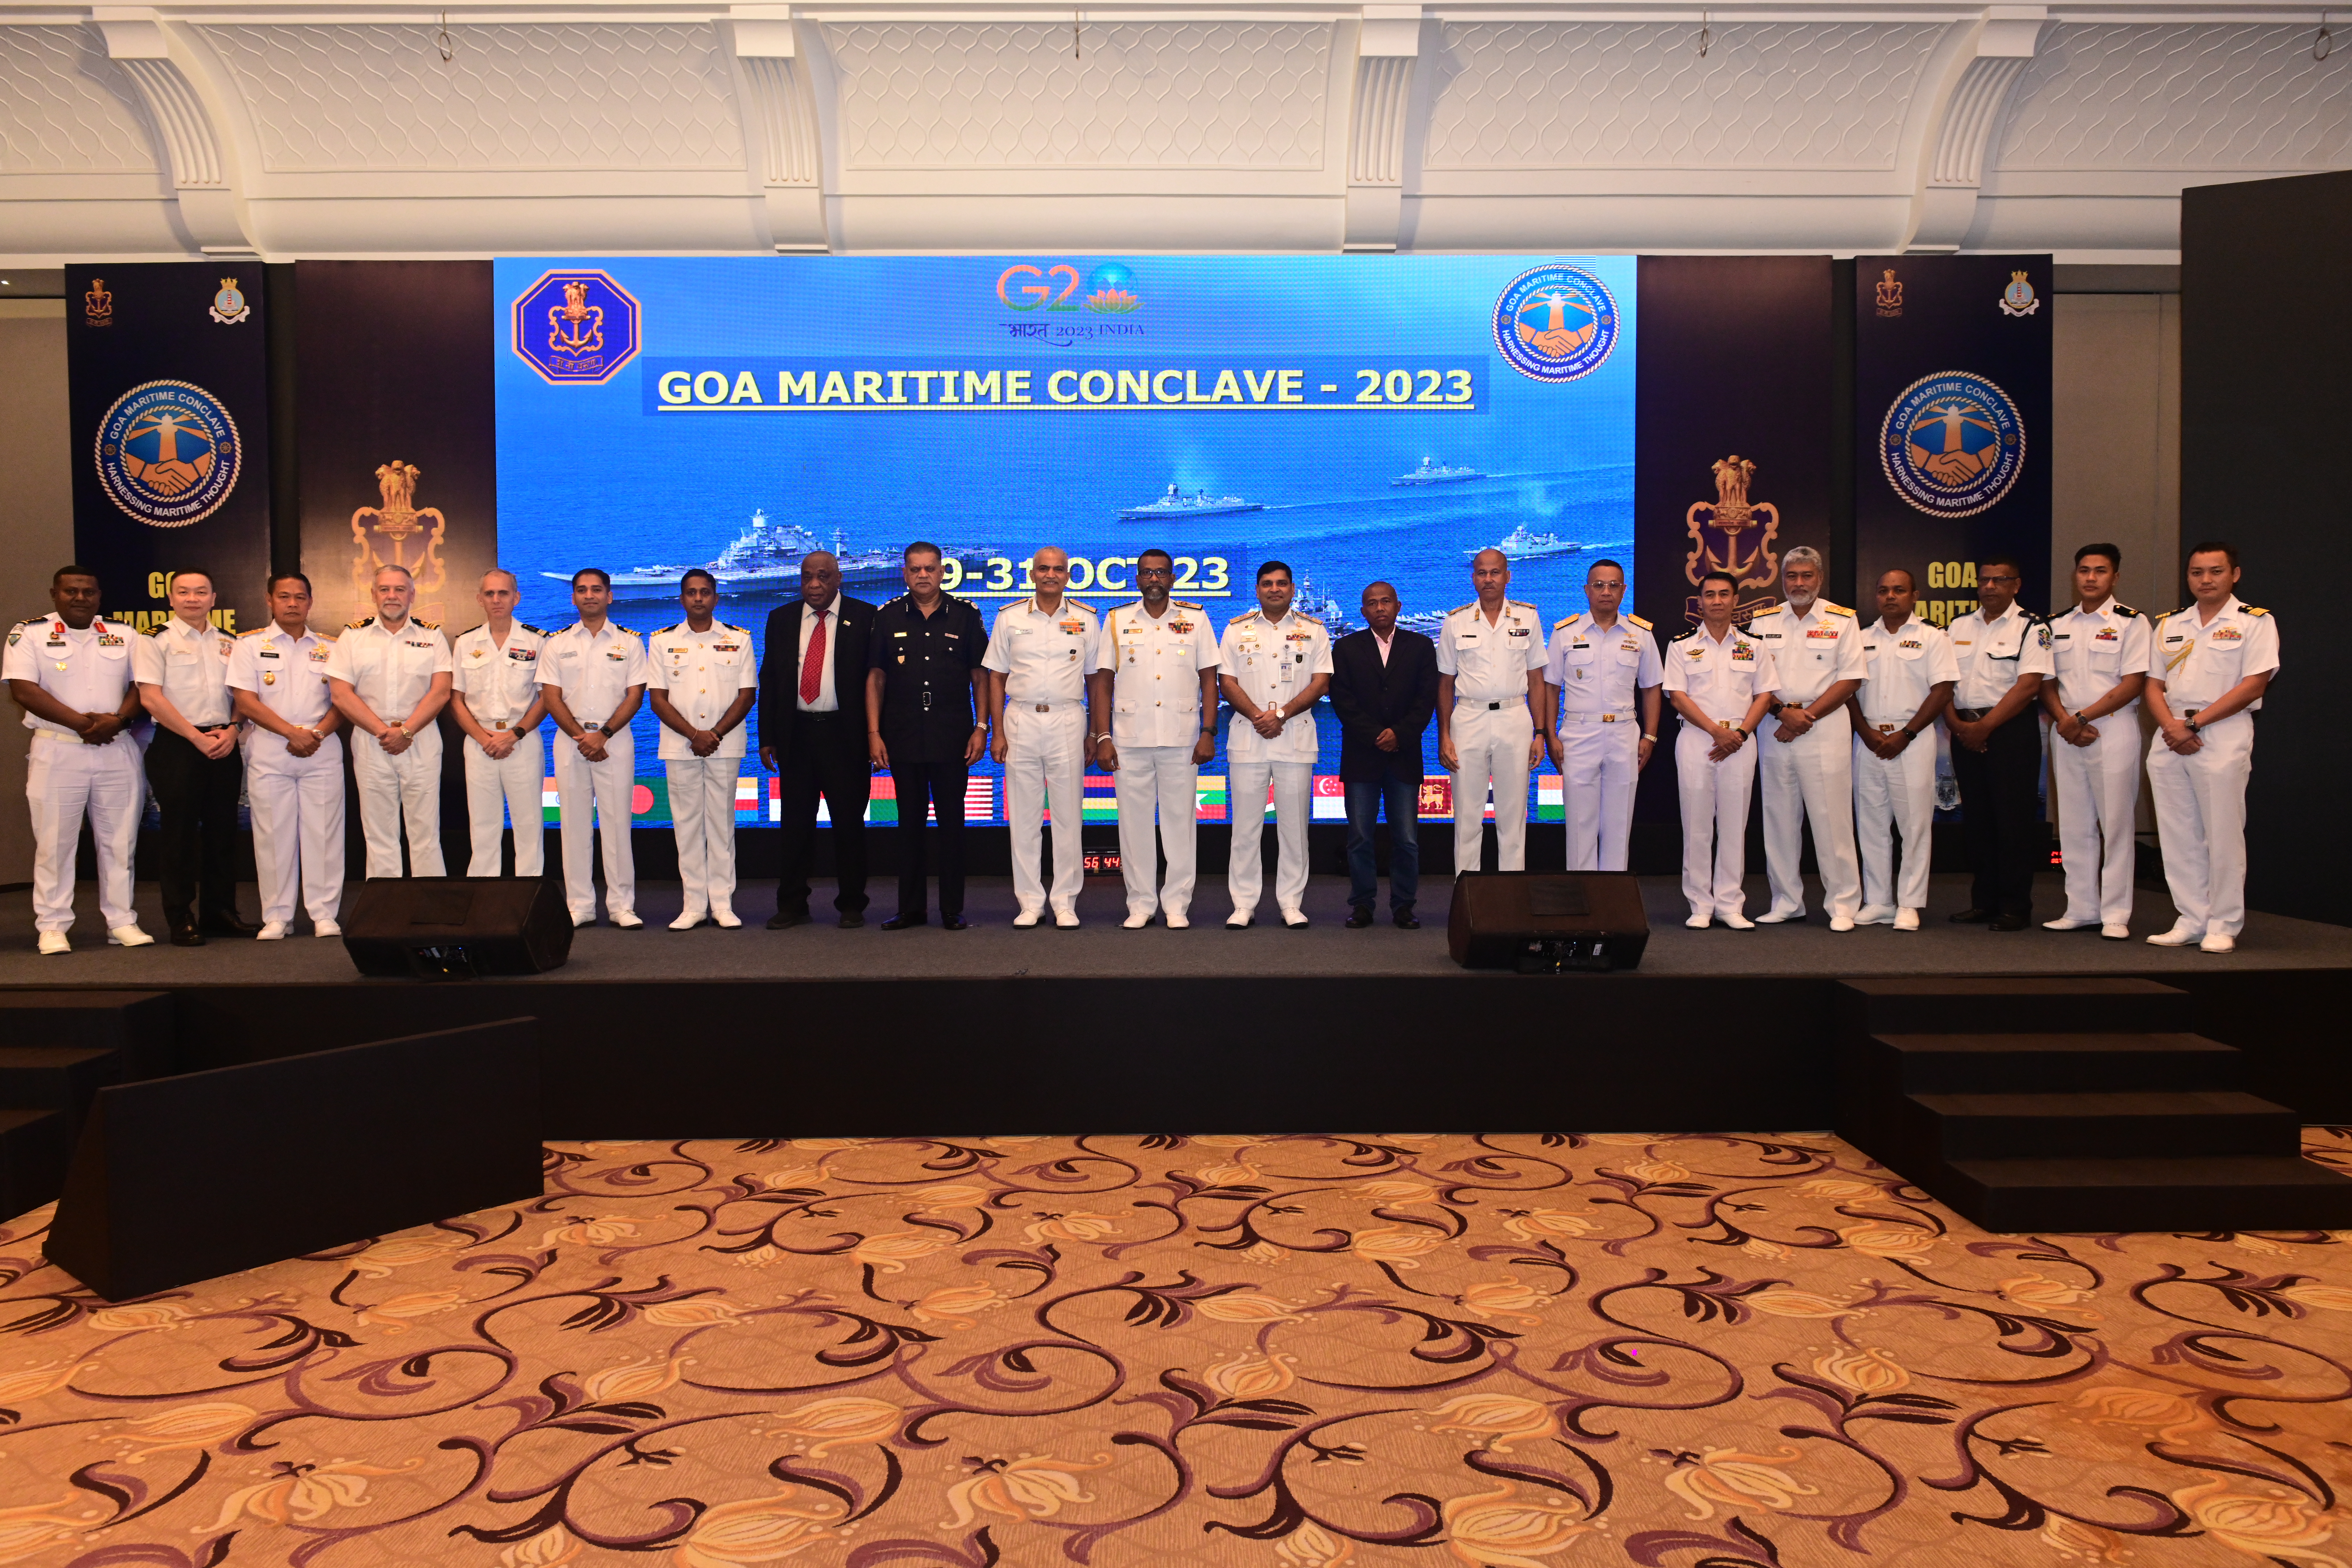 IFC-IOR participated in the 4th edition of Goa Maritime Conclave (GMC-23) from 29 – 31 Oct 23 at Goa